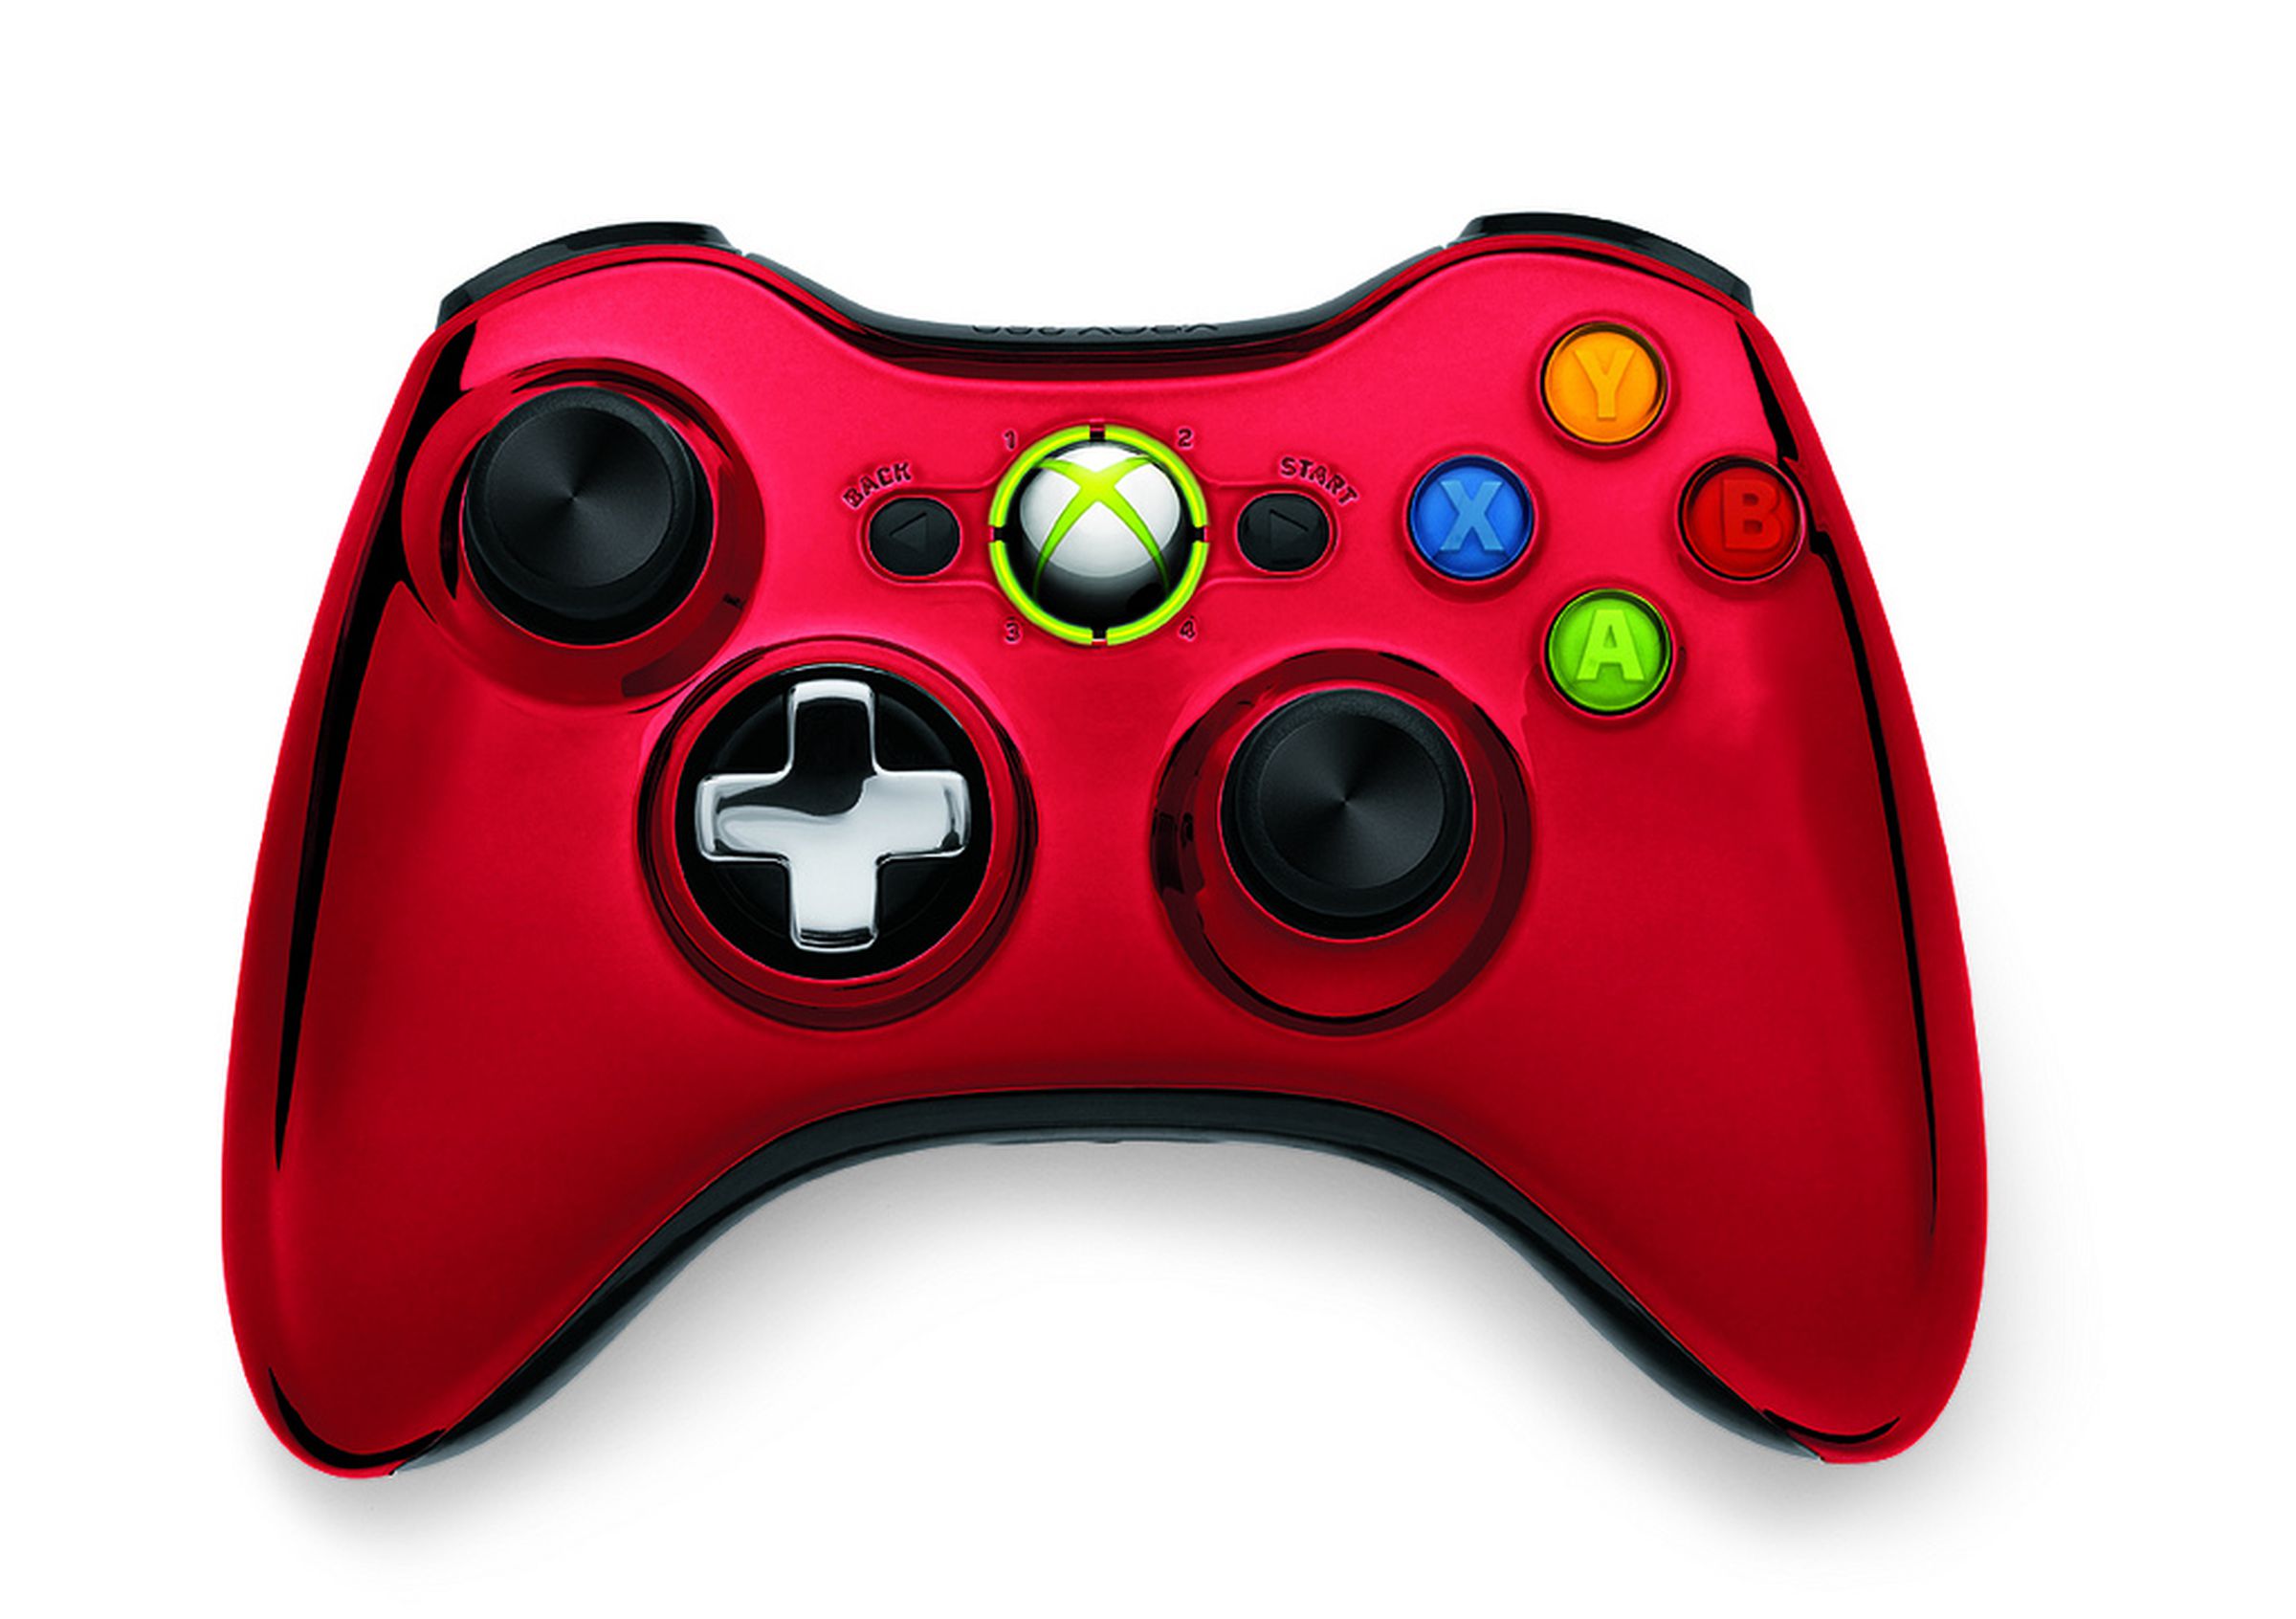 Chrome Xbox 360 controller hit in May.